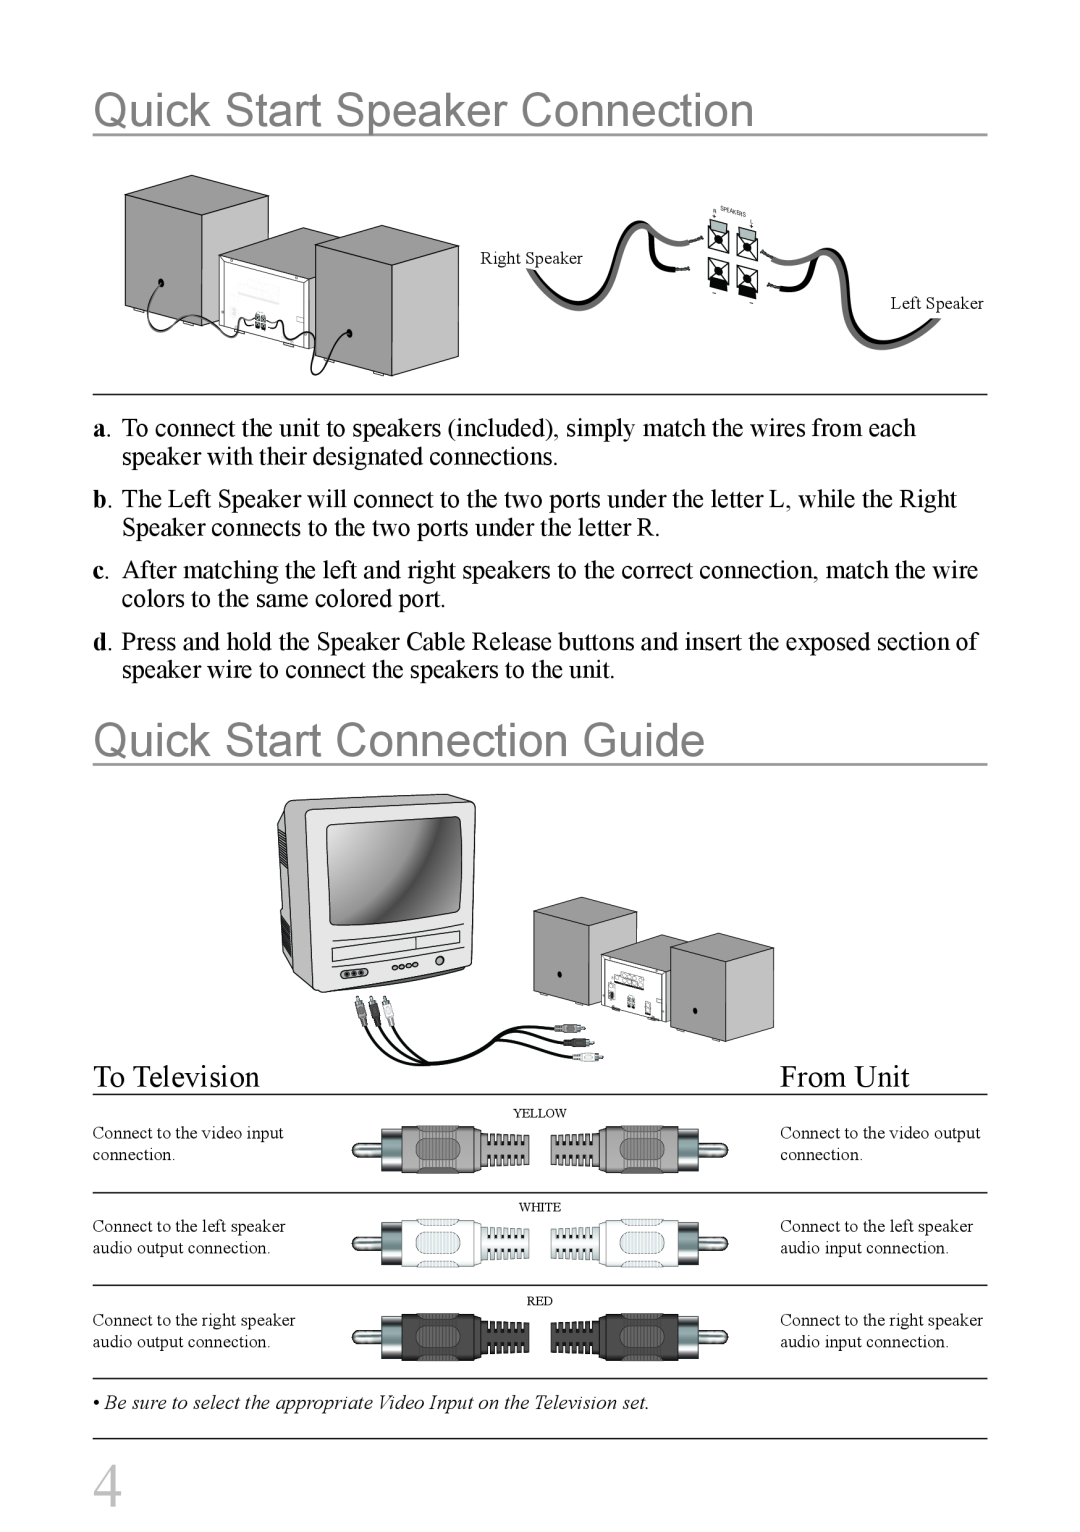 GPX HMD8017DT instruction manual Quick Start Speaker Connection, Quick Start Connection Guide, To Television, From Unit 